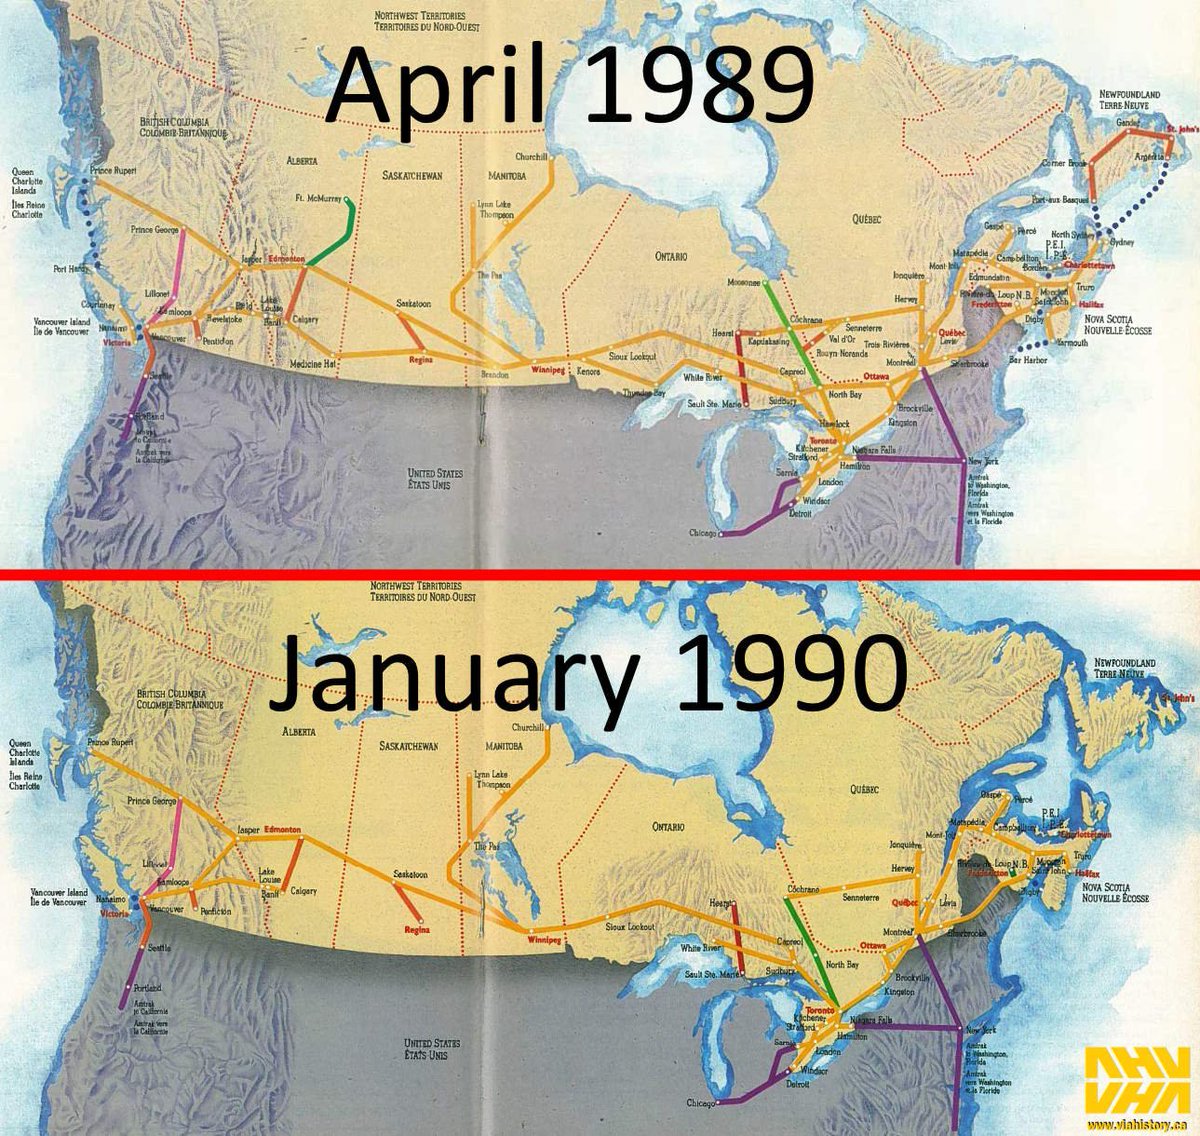 34 years ago today, due to cuts by the Mulroney government of 55% of the VIA subsidy, VIA Rail drastically reduced service. And has never been the same since. What Ford, Smith, Moe and other Conservative cuts will be talked about in 2050? 2024? VIA, before/after